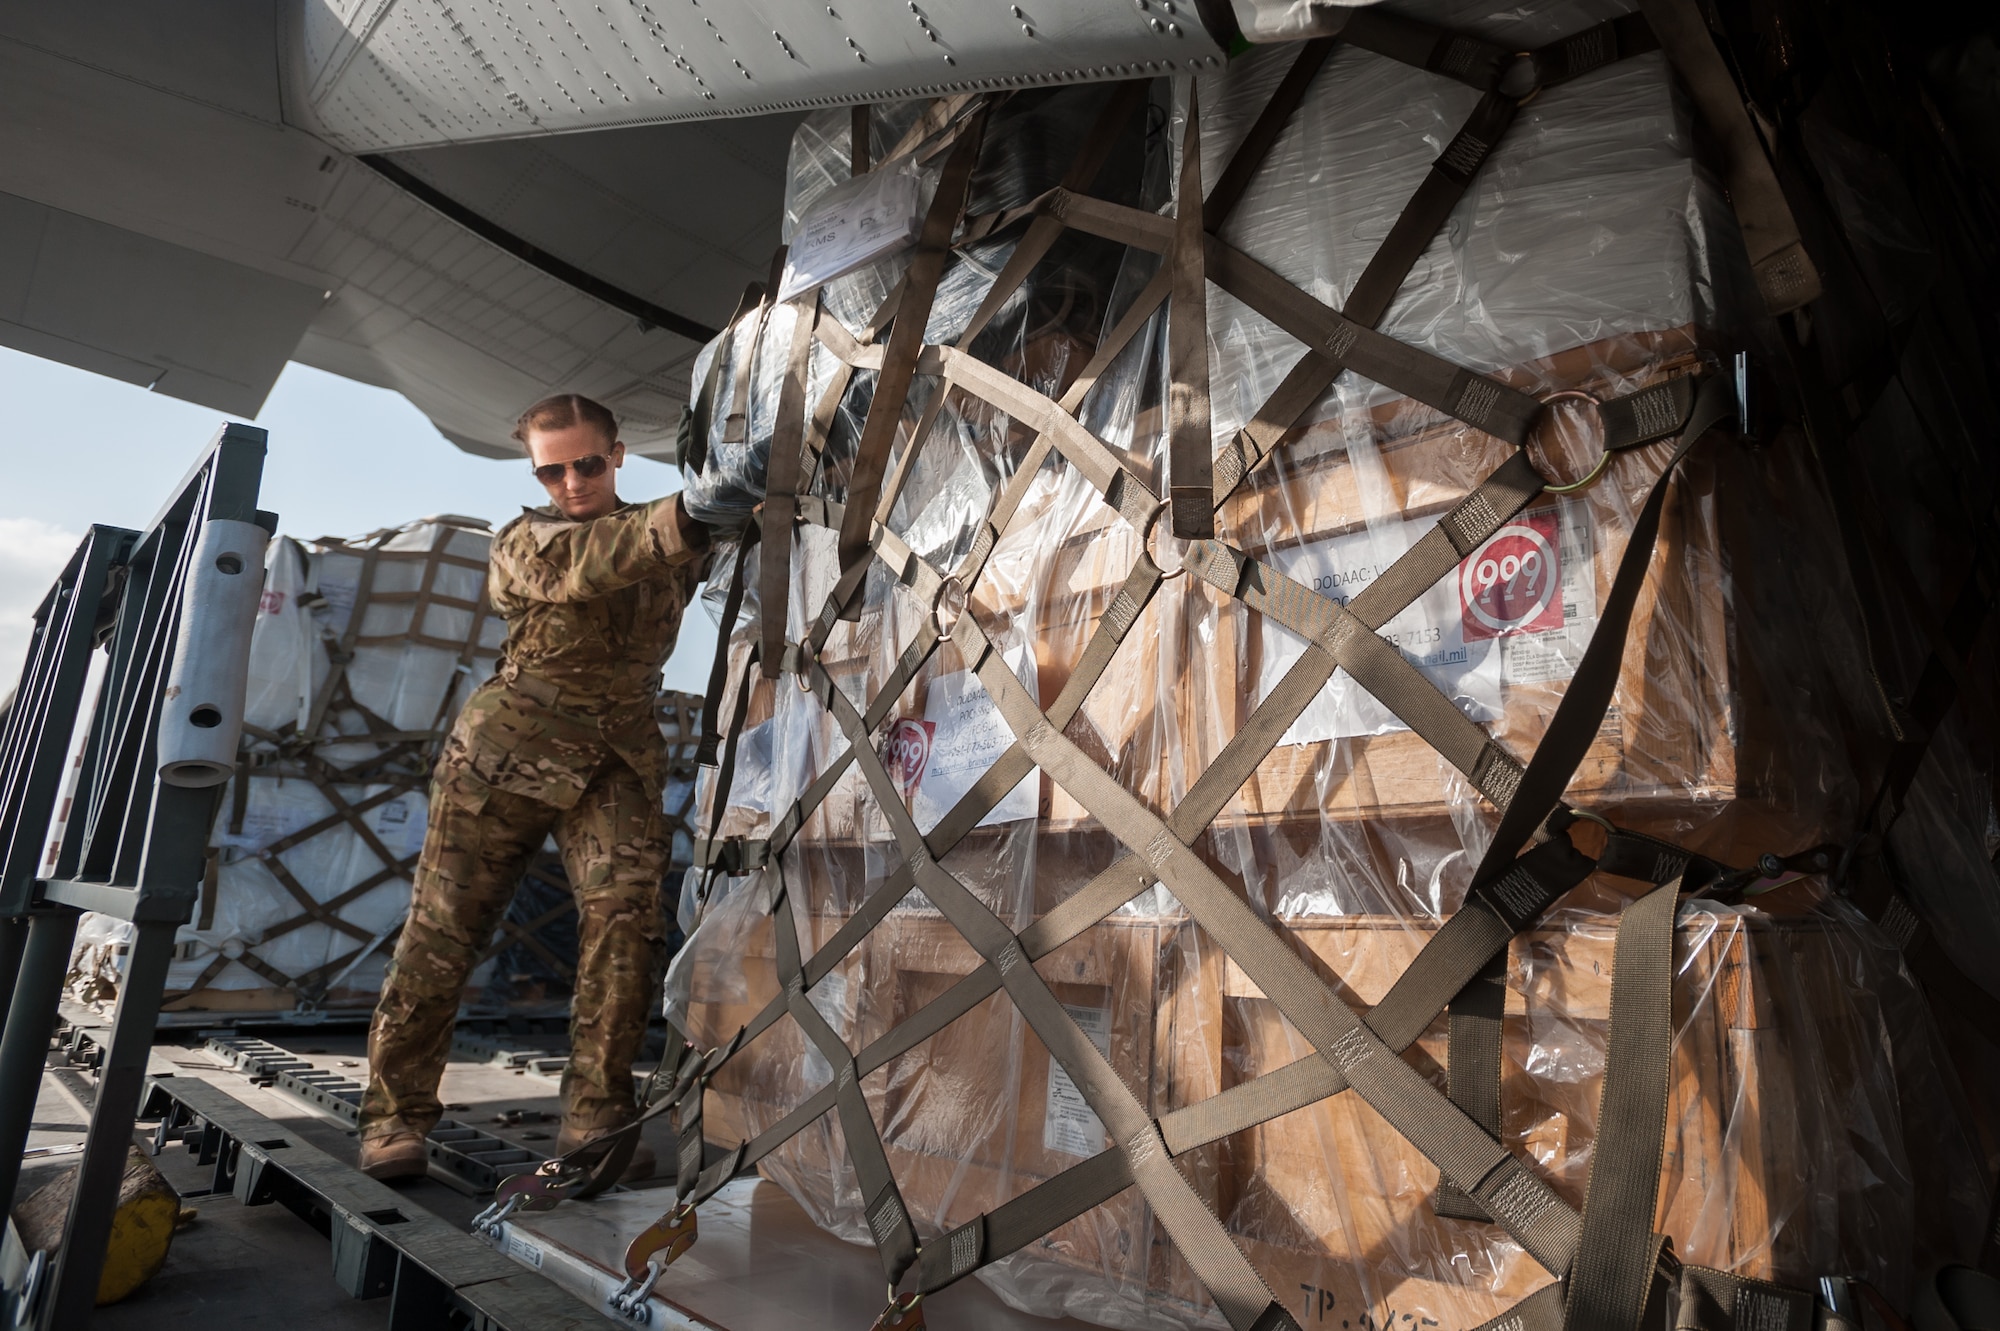 U.S. Air Force Airman 1st Class Teara Sapp, a loadmaster from the 317th Airlift Group at Dyess Air Force Base, Texas, loads a pallet of humanitarian aid and military supplies onto a U.S. Air Force C-130 aircraft at Léopold Sédar Senghor International Airport in Dakar, Senegal, Nov. 4, 2014. Sapp and 35 other Airmen from Dyess are deployed to Senegal as part of the 787th Air Expeditionary Squadron, which is flying cargo into Monrovia, Liberia, in support of Operation United Assistance, the U.S. Agency for International Development-led, whole-of-government effort to contain the Ebola virus outbreak in West Africa. (U.S. Air National Guard photo by Maj. Dale Greer)